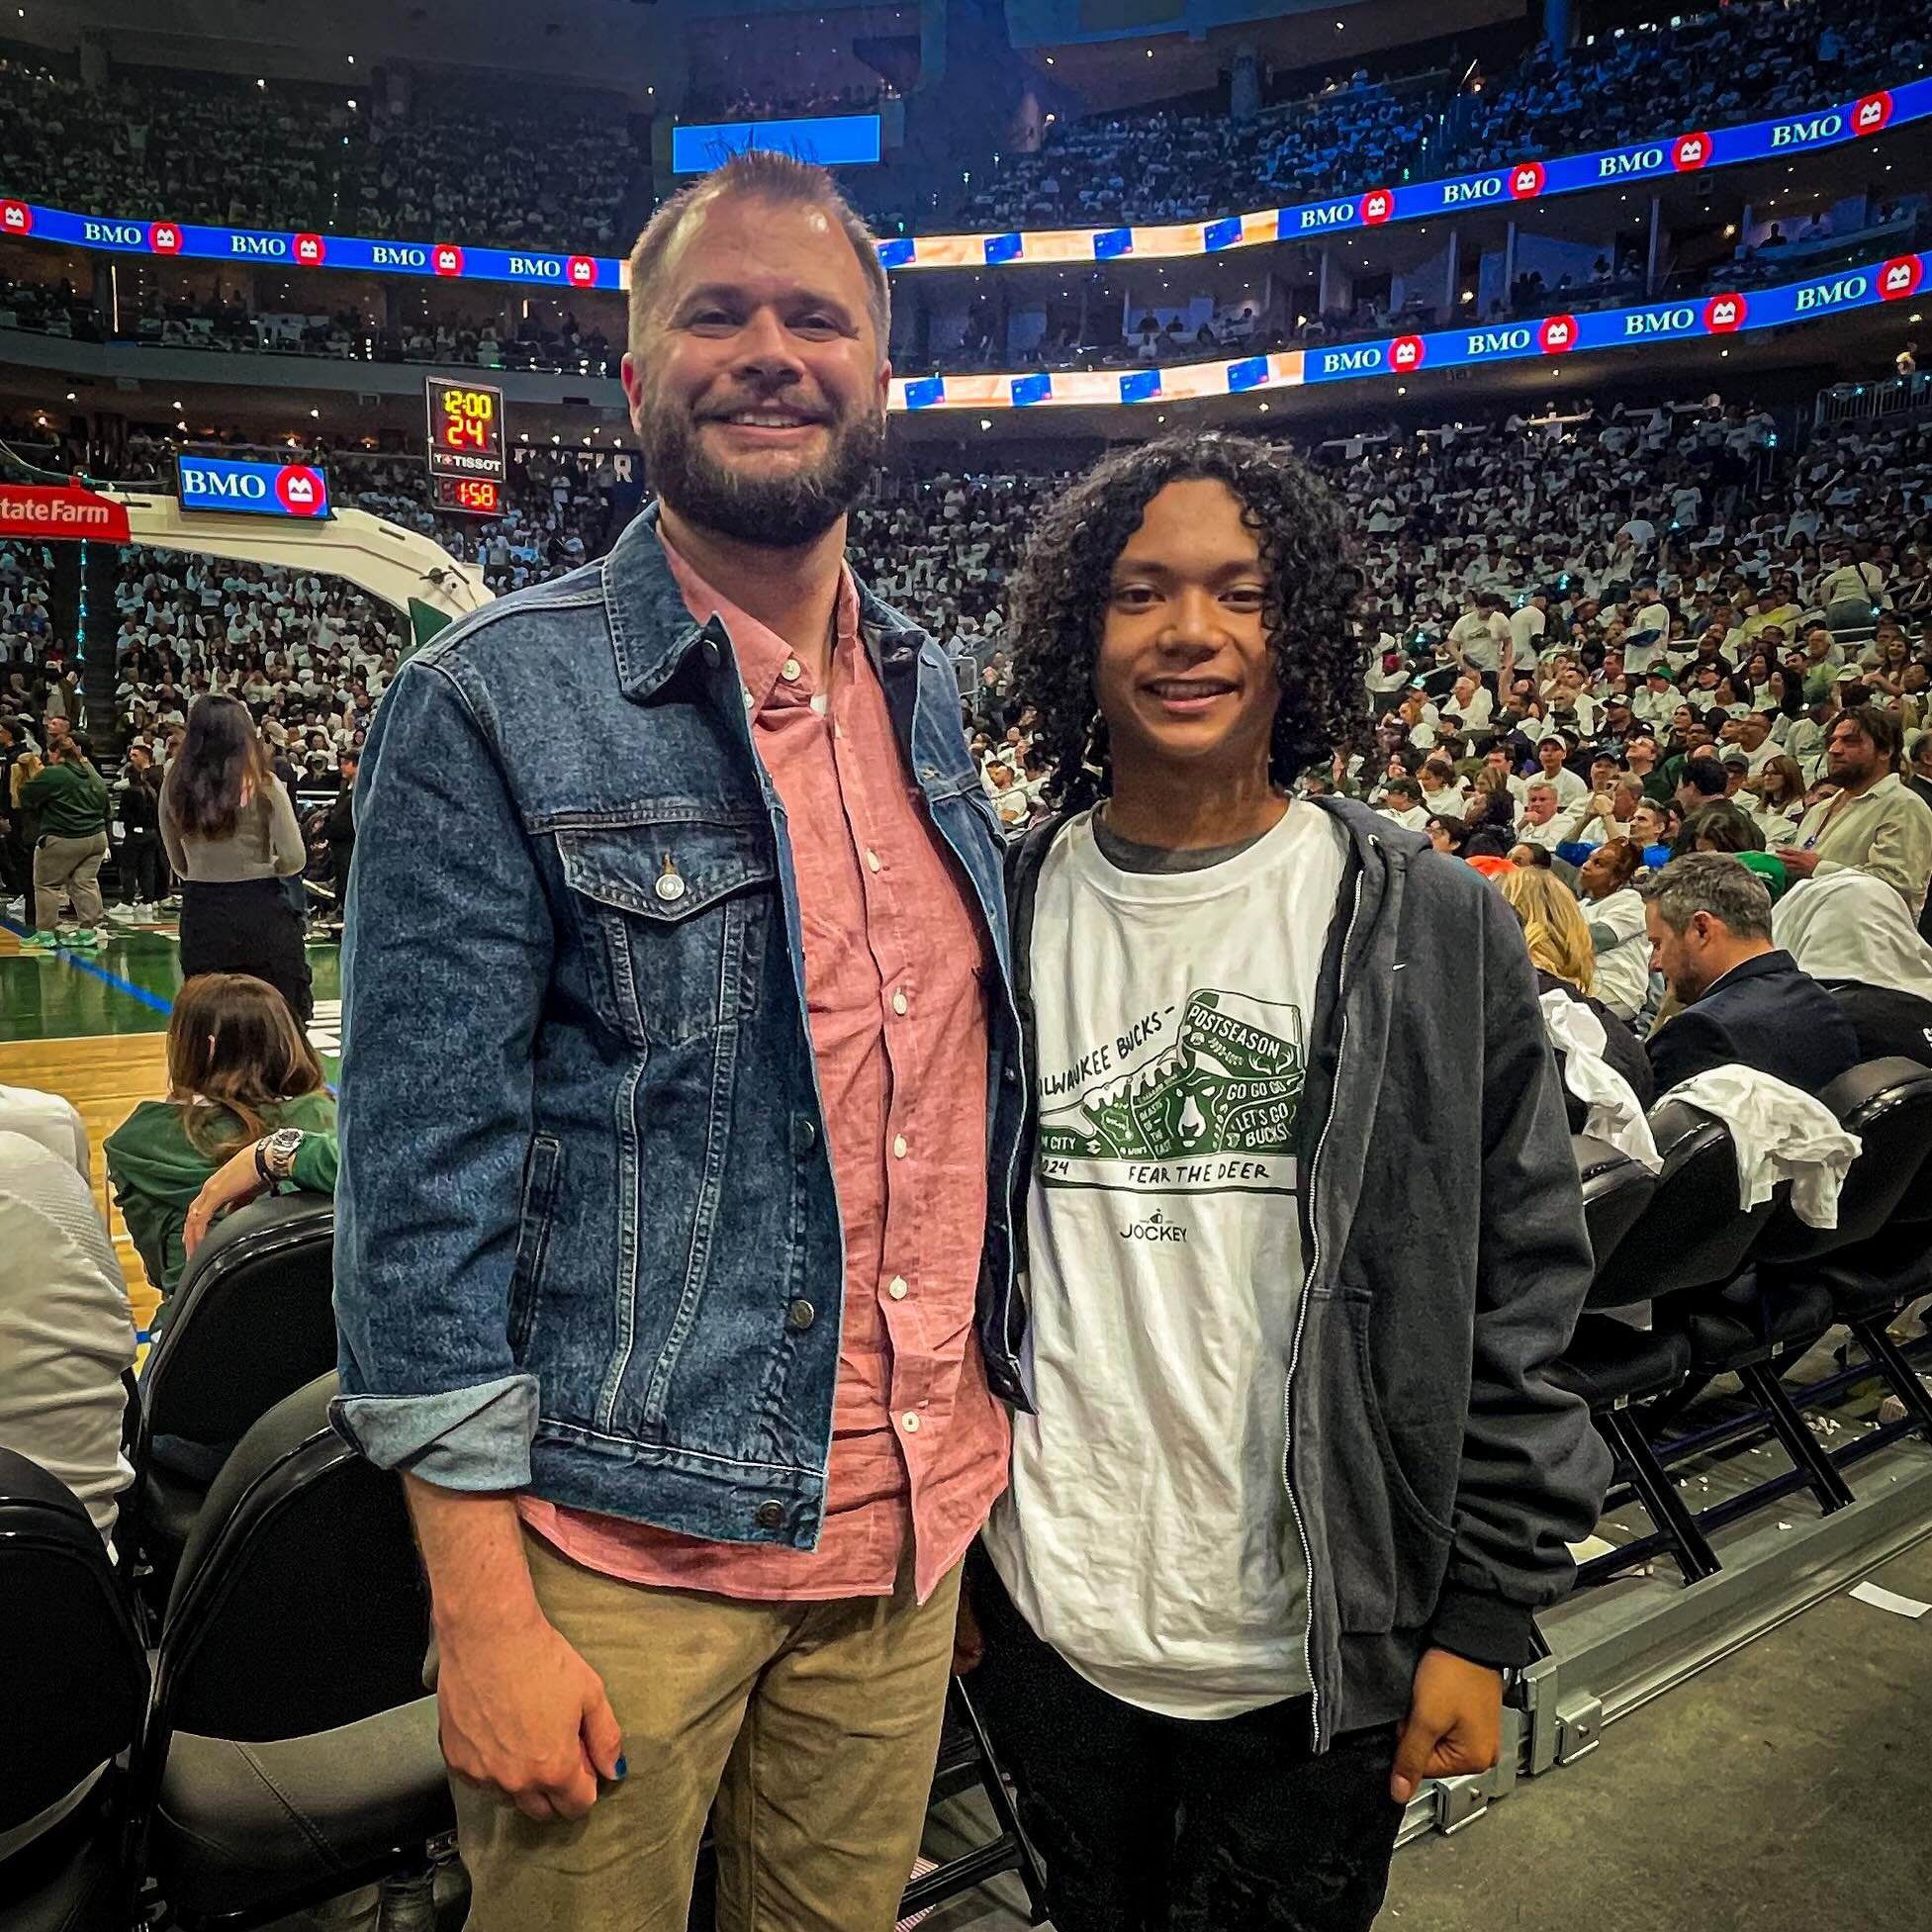 We promised our high school student-athletes we&rsquo;d take them to the NBA game of their choice if they achieved a 4.0 in any semester. Congrats to Ivan for achieving a 4.429 GPA and currently sitting in the top 10 of his class! He wisely chose to 